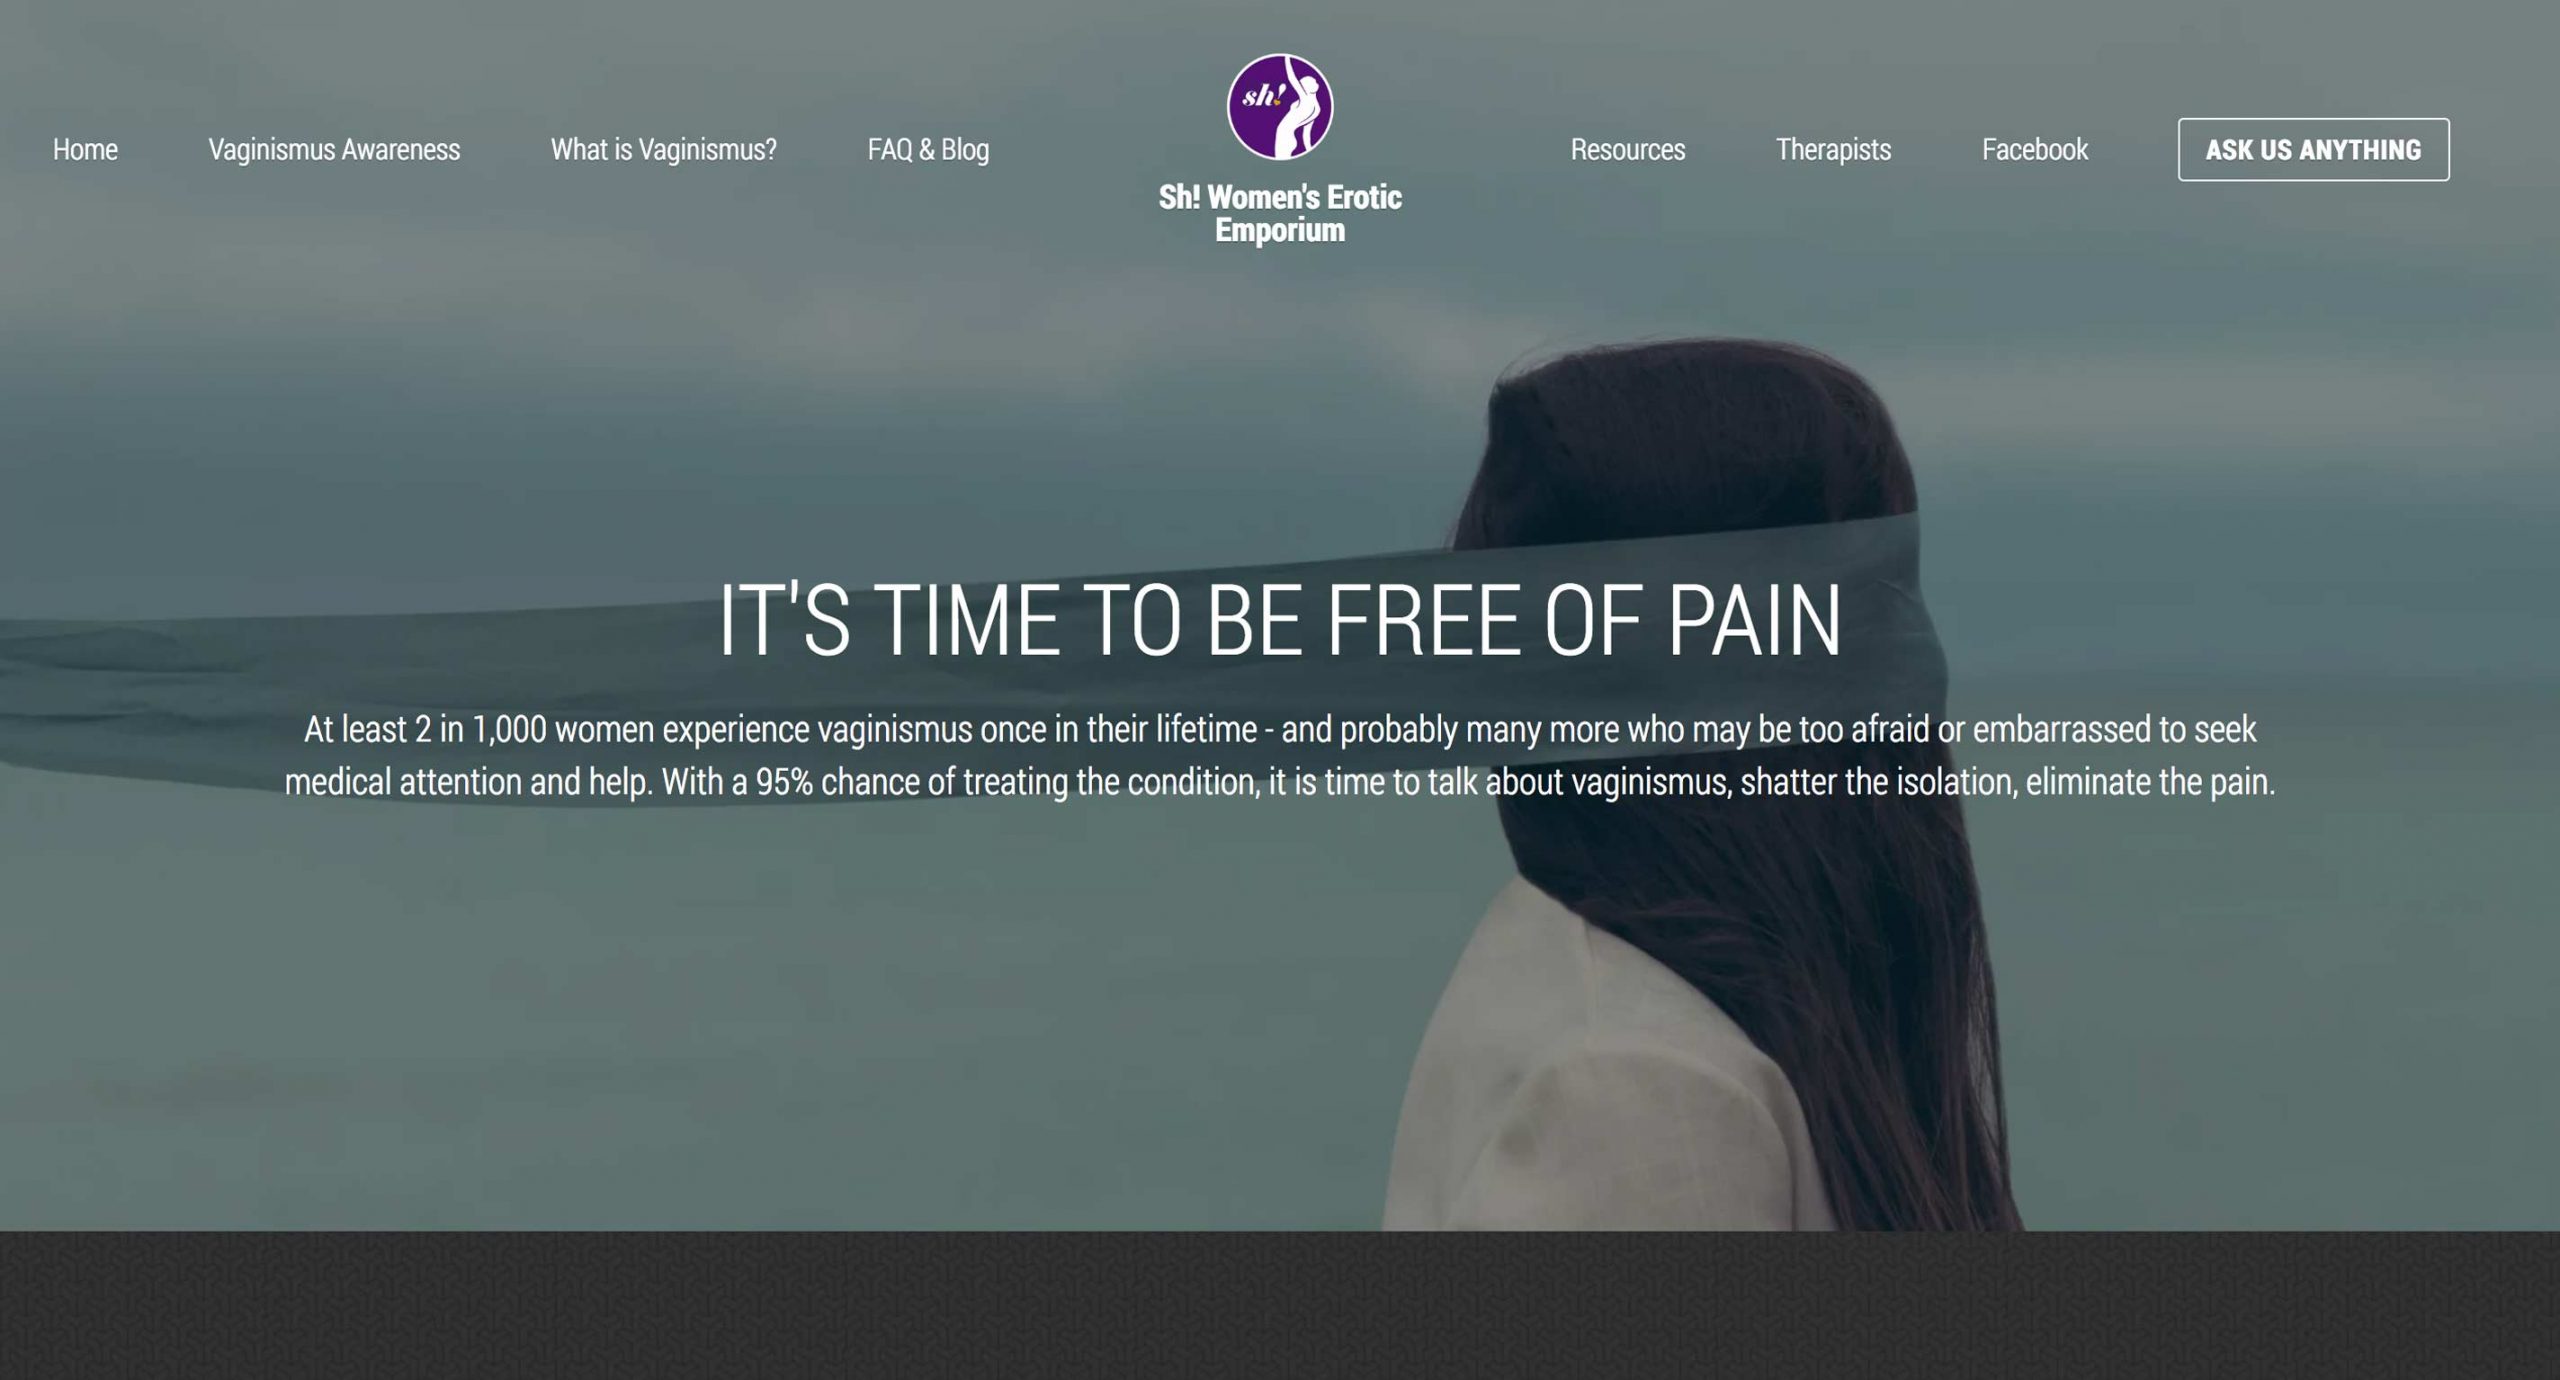 Vaginismus Awareness - Home Page